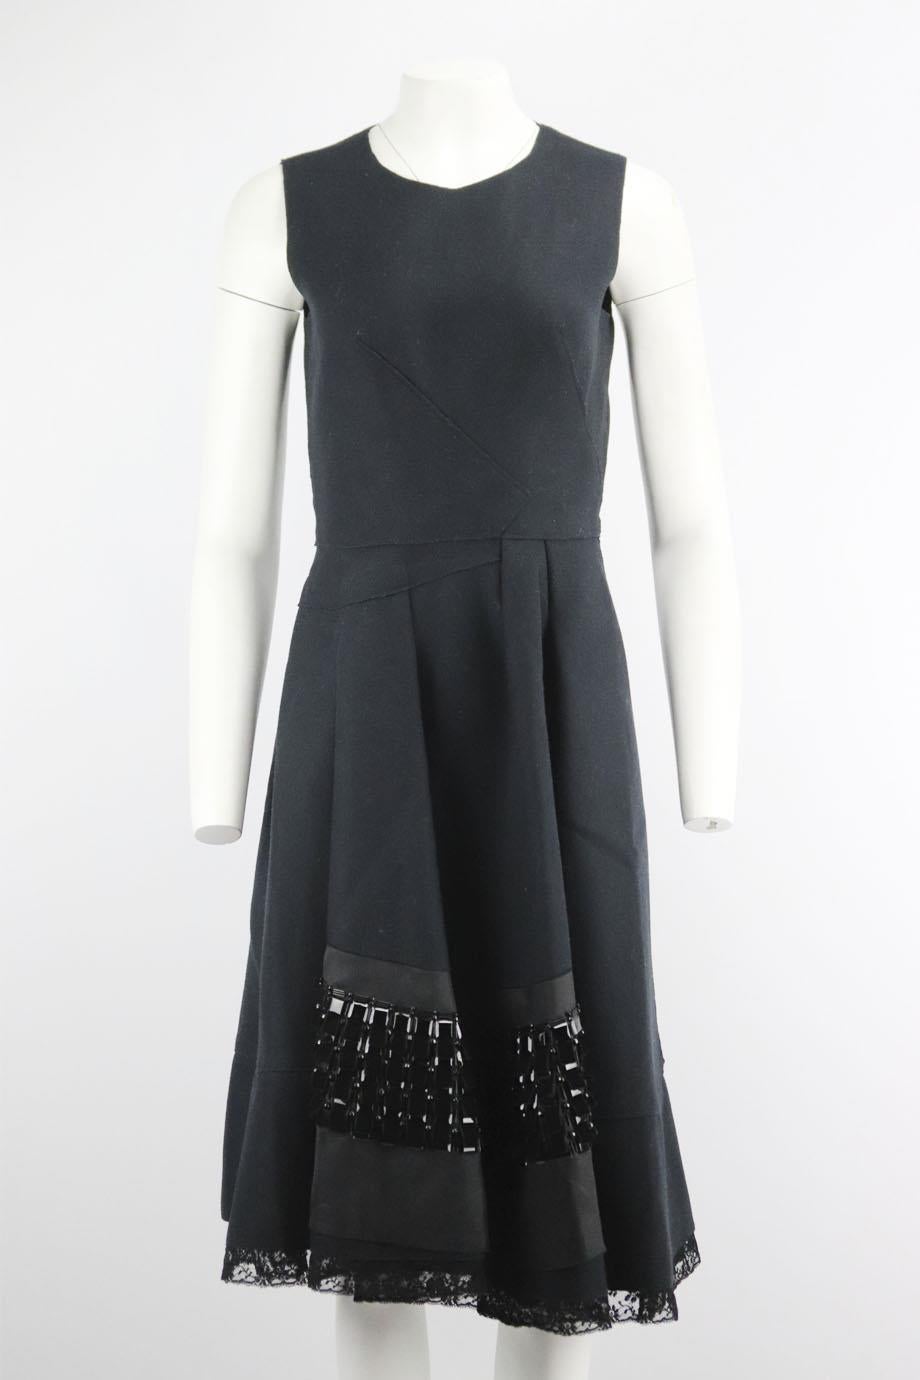 Prada lace trimmed embellished wool blend dress. Black. Sleeveless, crewneck. Zip fastening at back. 89% Wool, 11% polyamide. Size: IT 42 (UK 10, US 6, FR 38). Bust: 34 in. Waist: 27 in. Hips: 50 in. Length: 45 in
